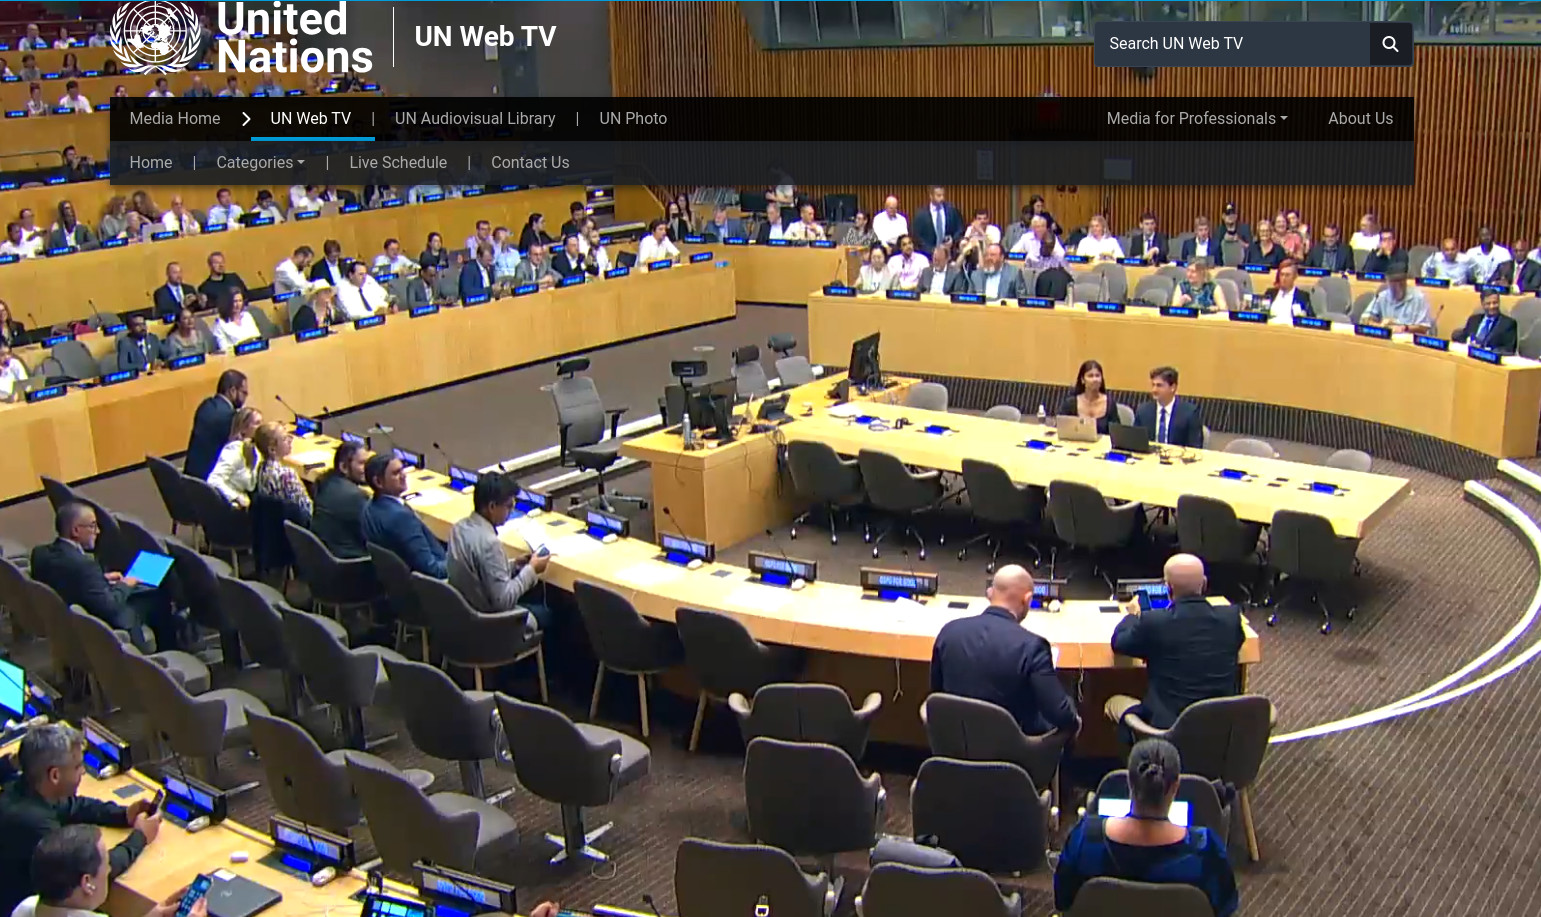 Screenshot from UN Web TV showing the media controls and a still image of the conference room